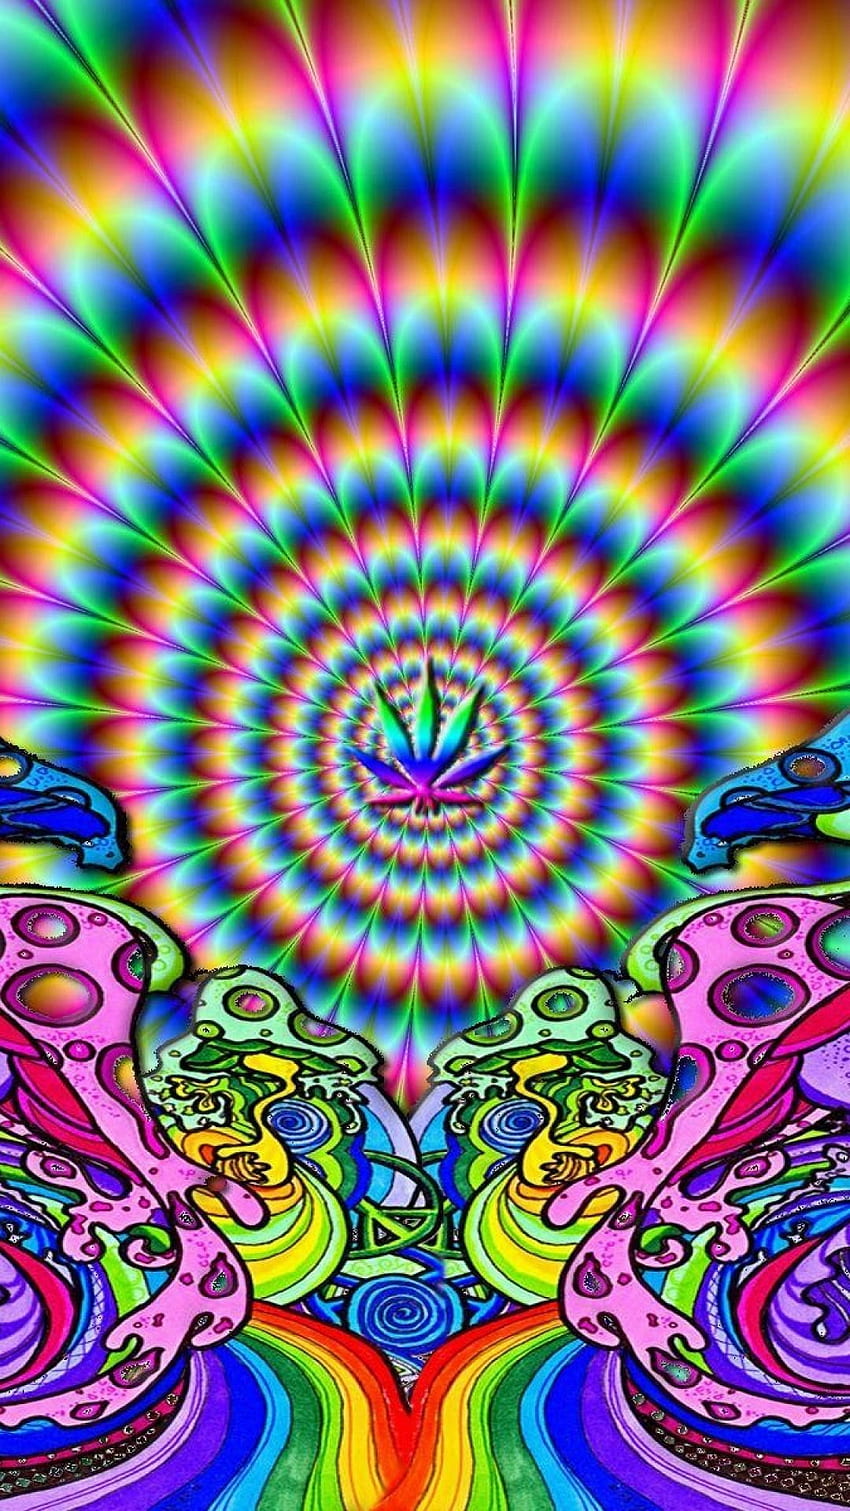 Psychedelic Live Wallpaper  Free download and software reviews  CNET  Download